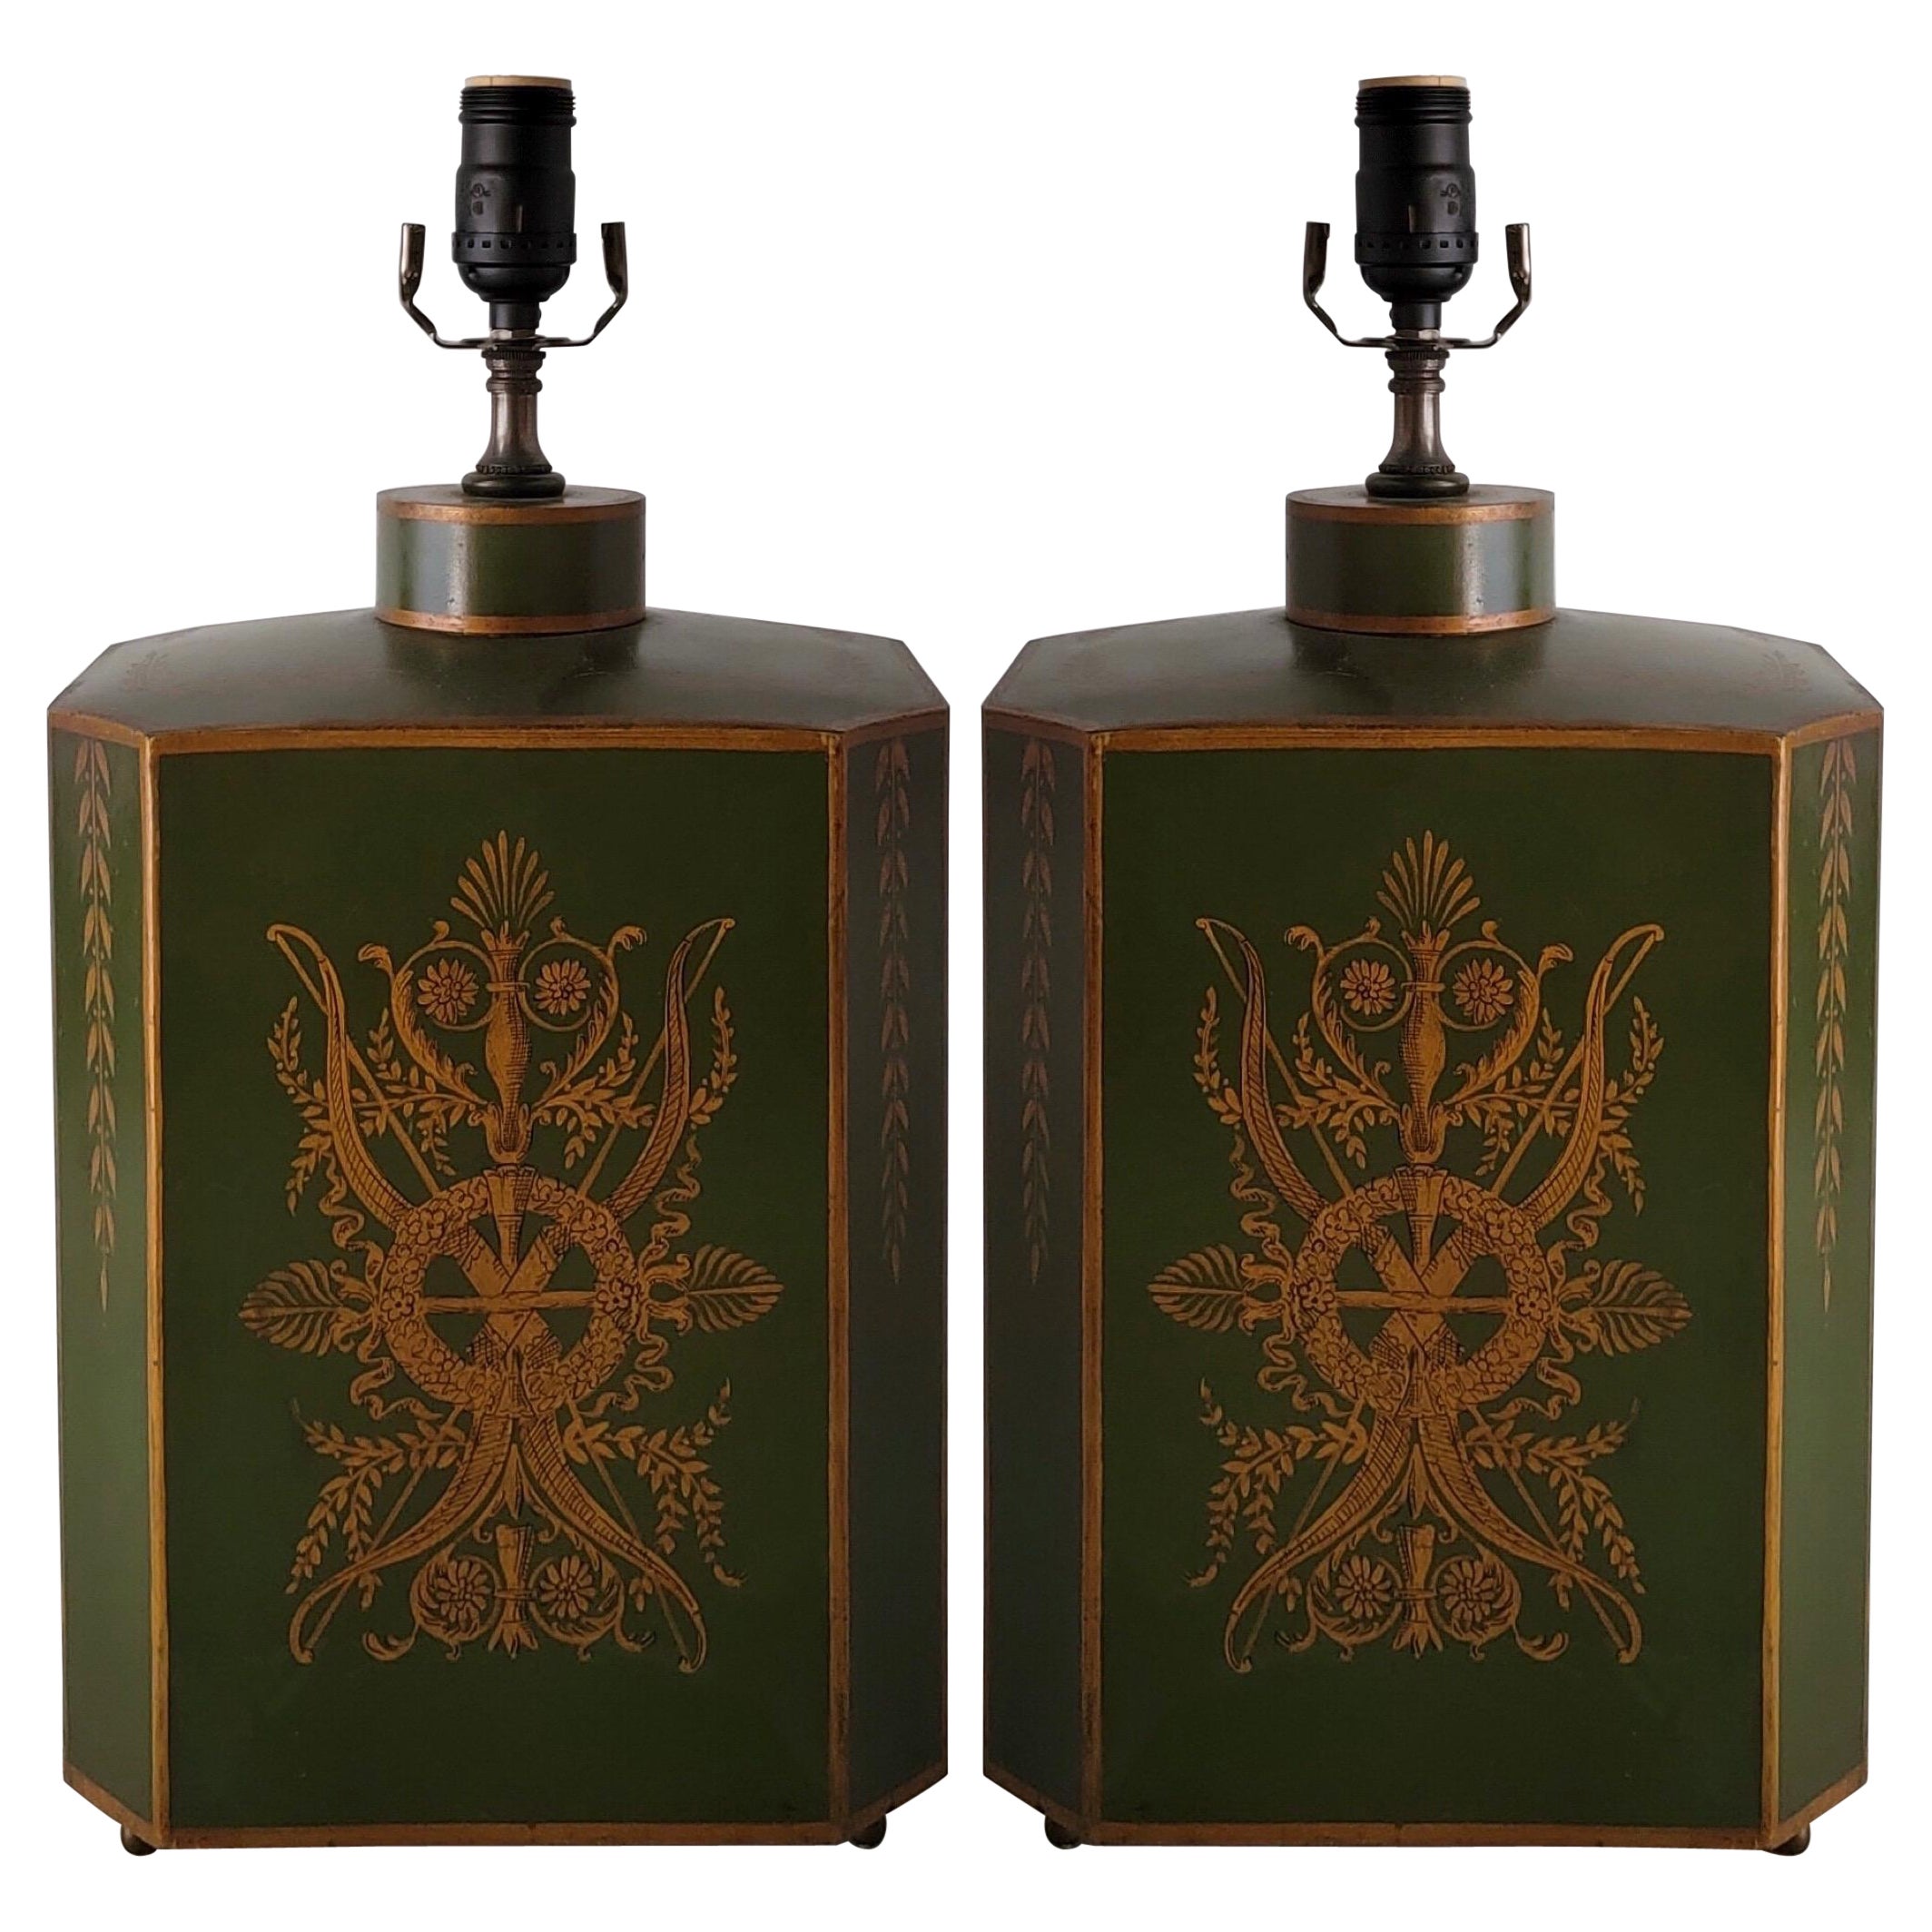 Early 20th-C. Signed French Neo-Classical Style Toleware Canister Lamps, Pair